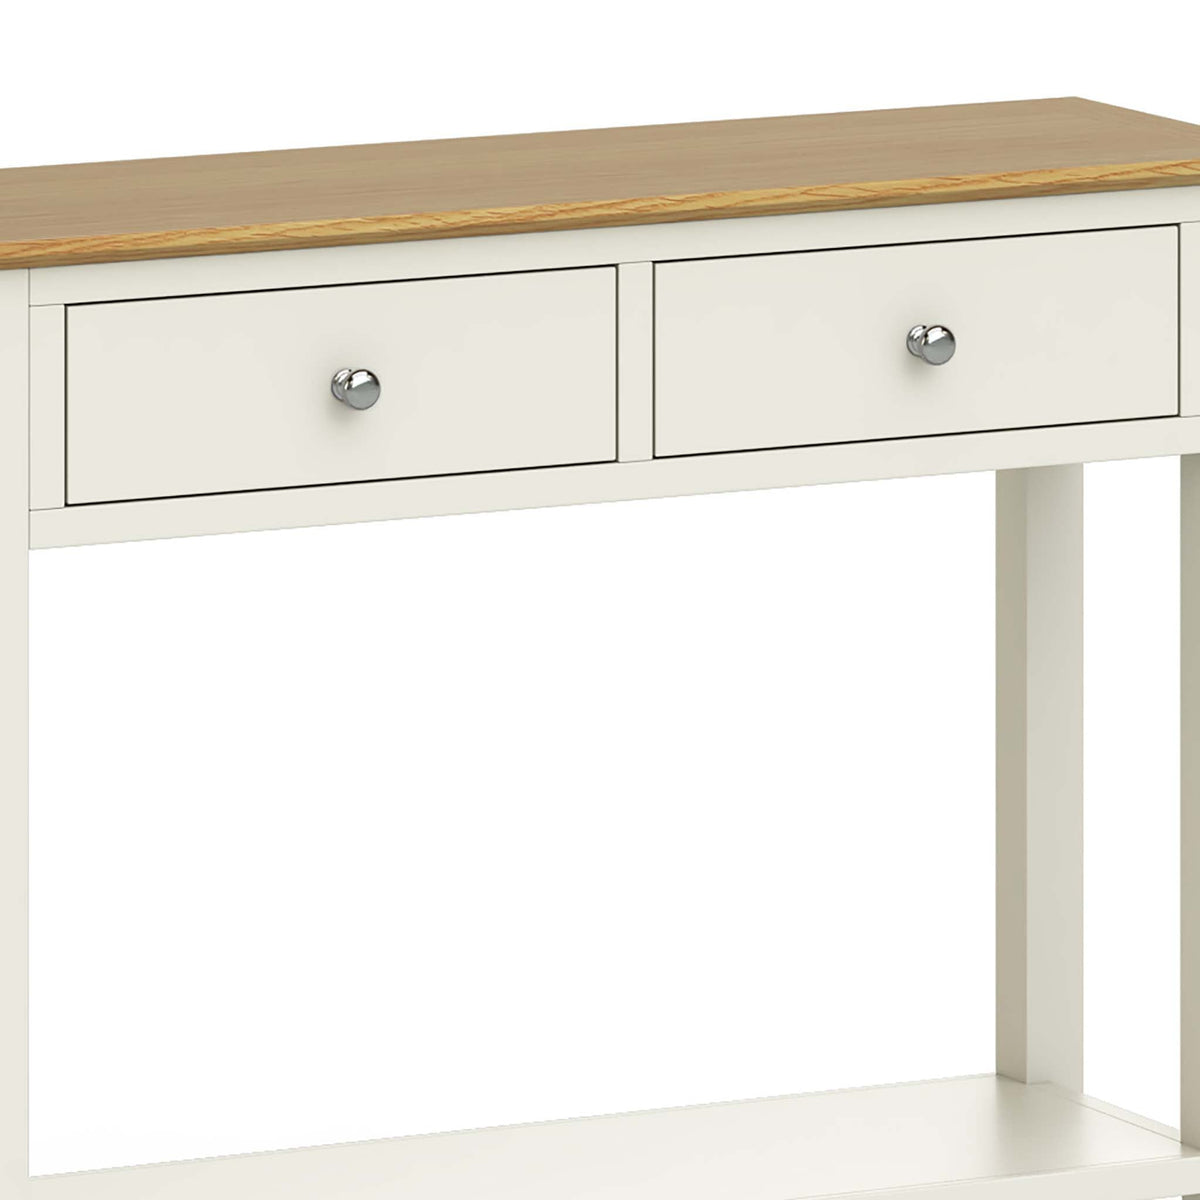 The Windsor Cream Painted Console Table with Storage Drawers - Close Up of Drawer Fronts